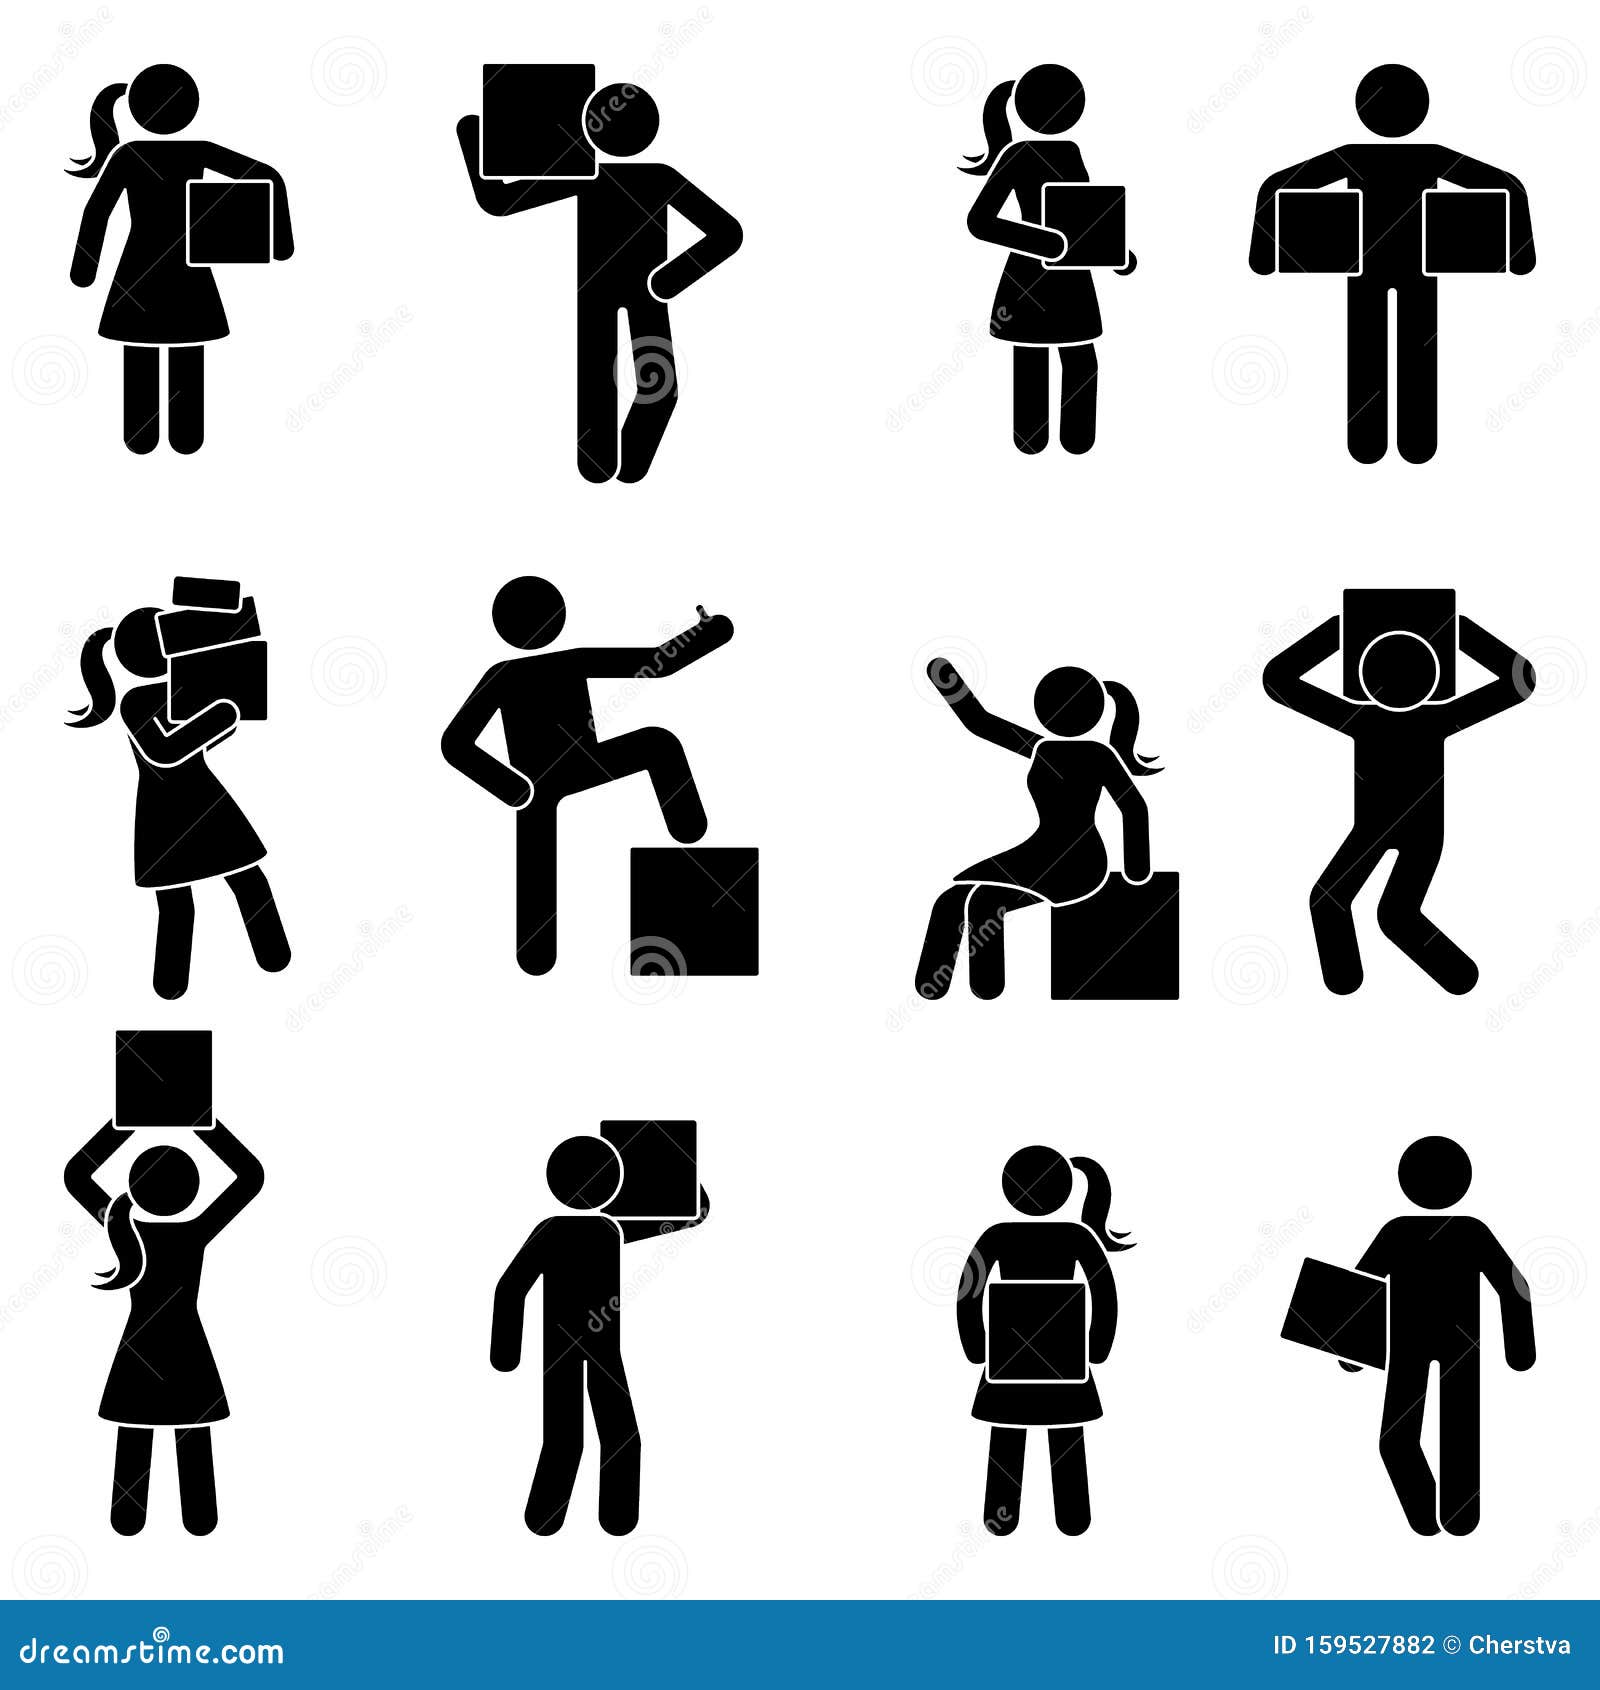 stick figure man and woman carrying box  icon pictogram. guy and lady holding, moving, standing silhouette.